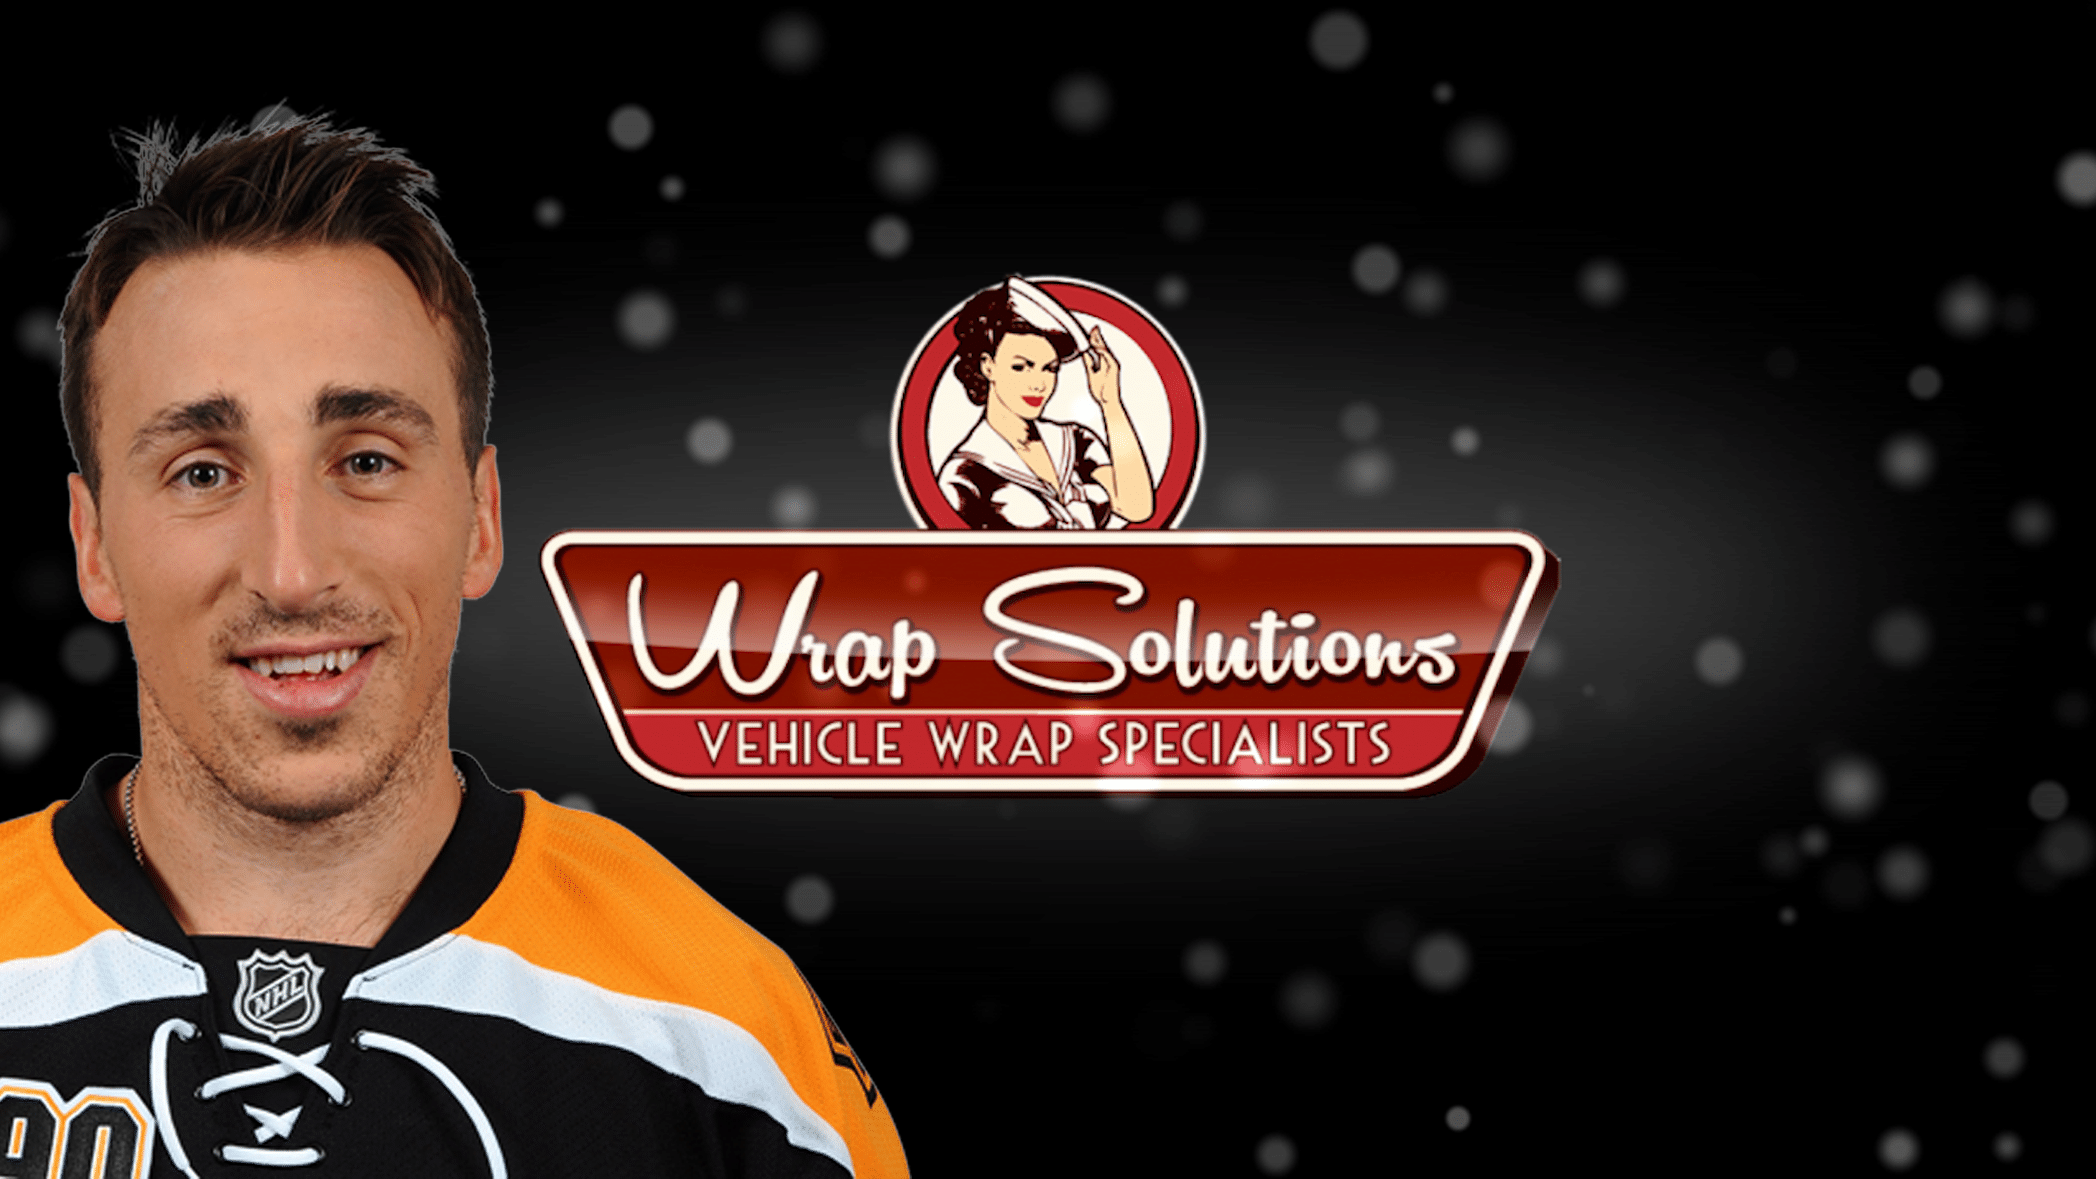 63 Reasons To Wrap With Us